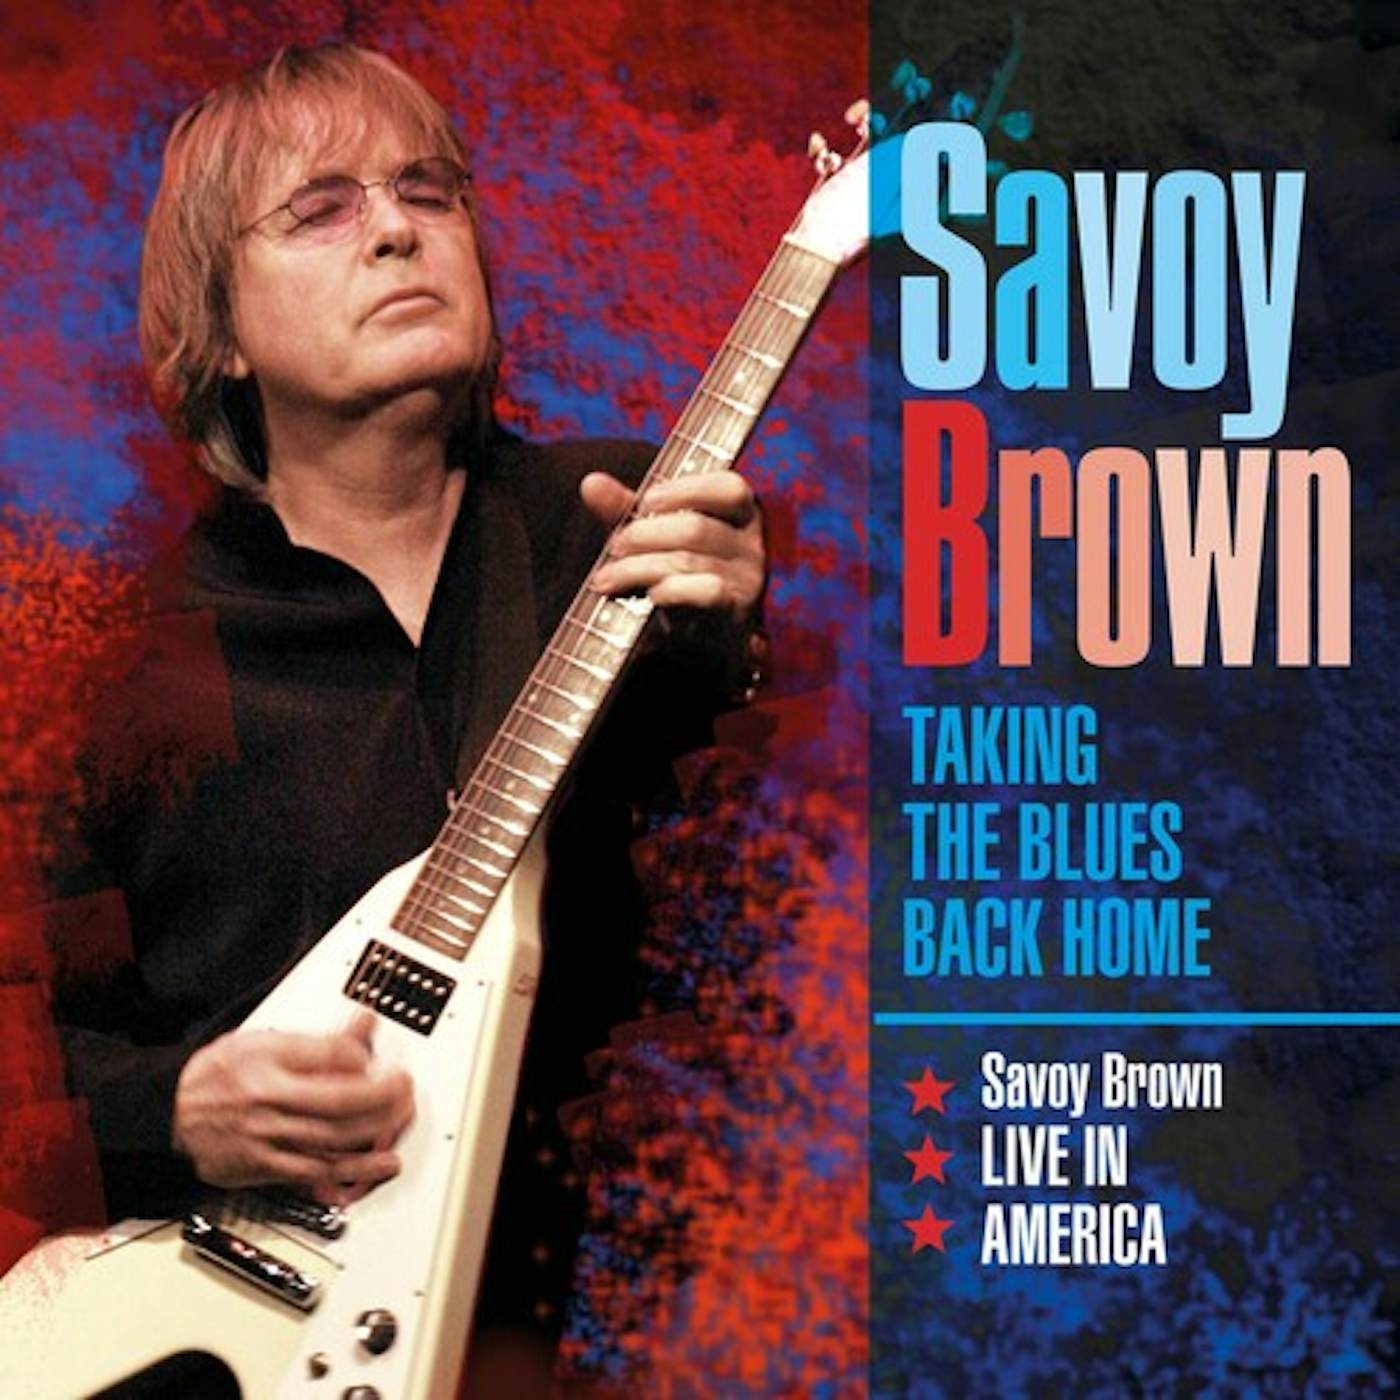 Savoy Brown TAKING THE BLUES BACK HOME LIVE IN AMERICA CD